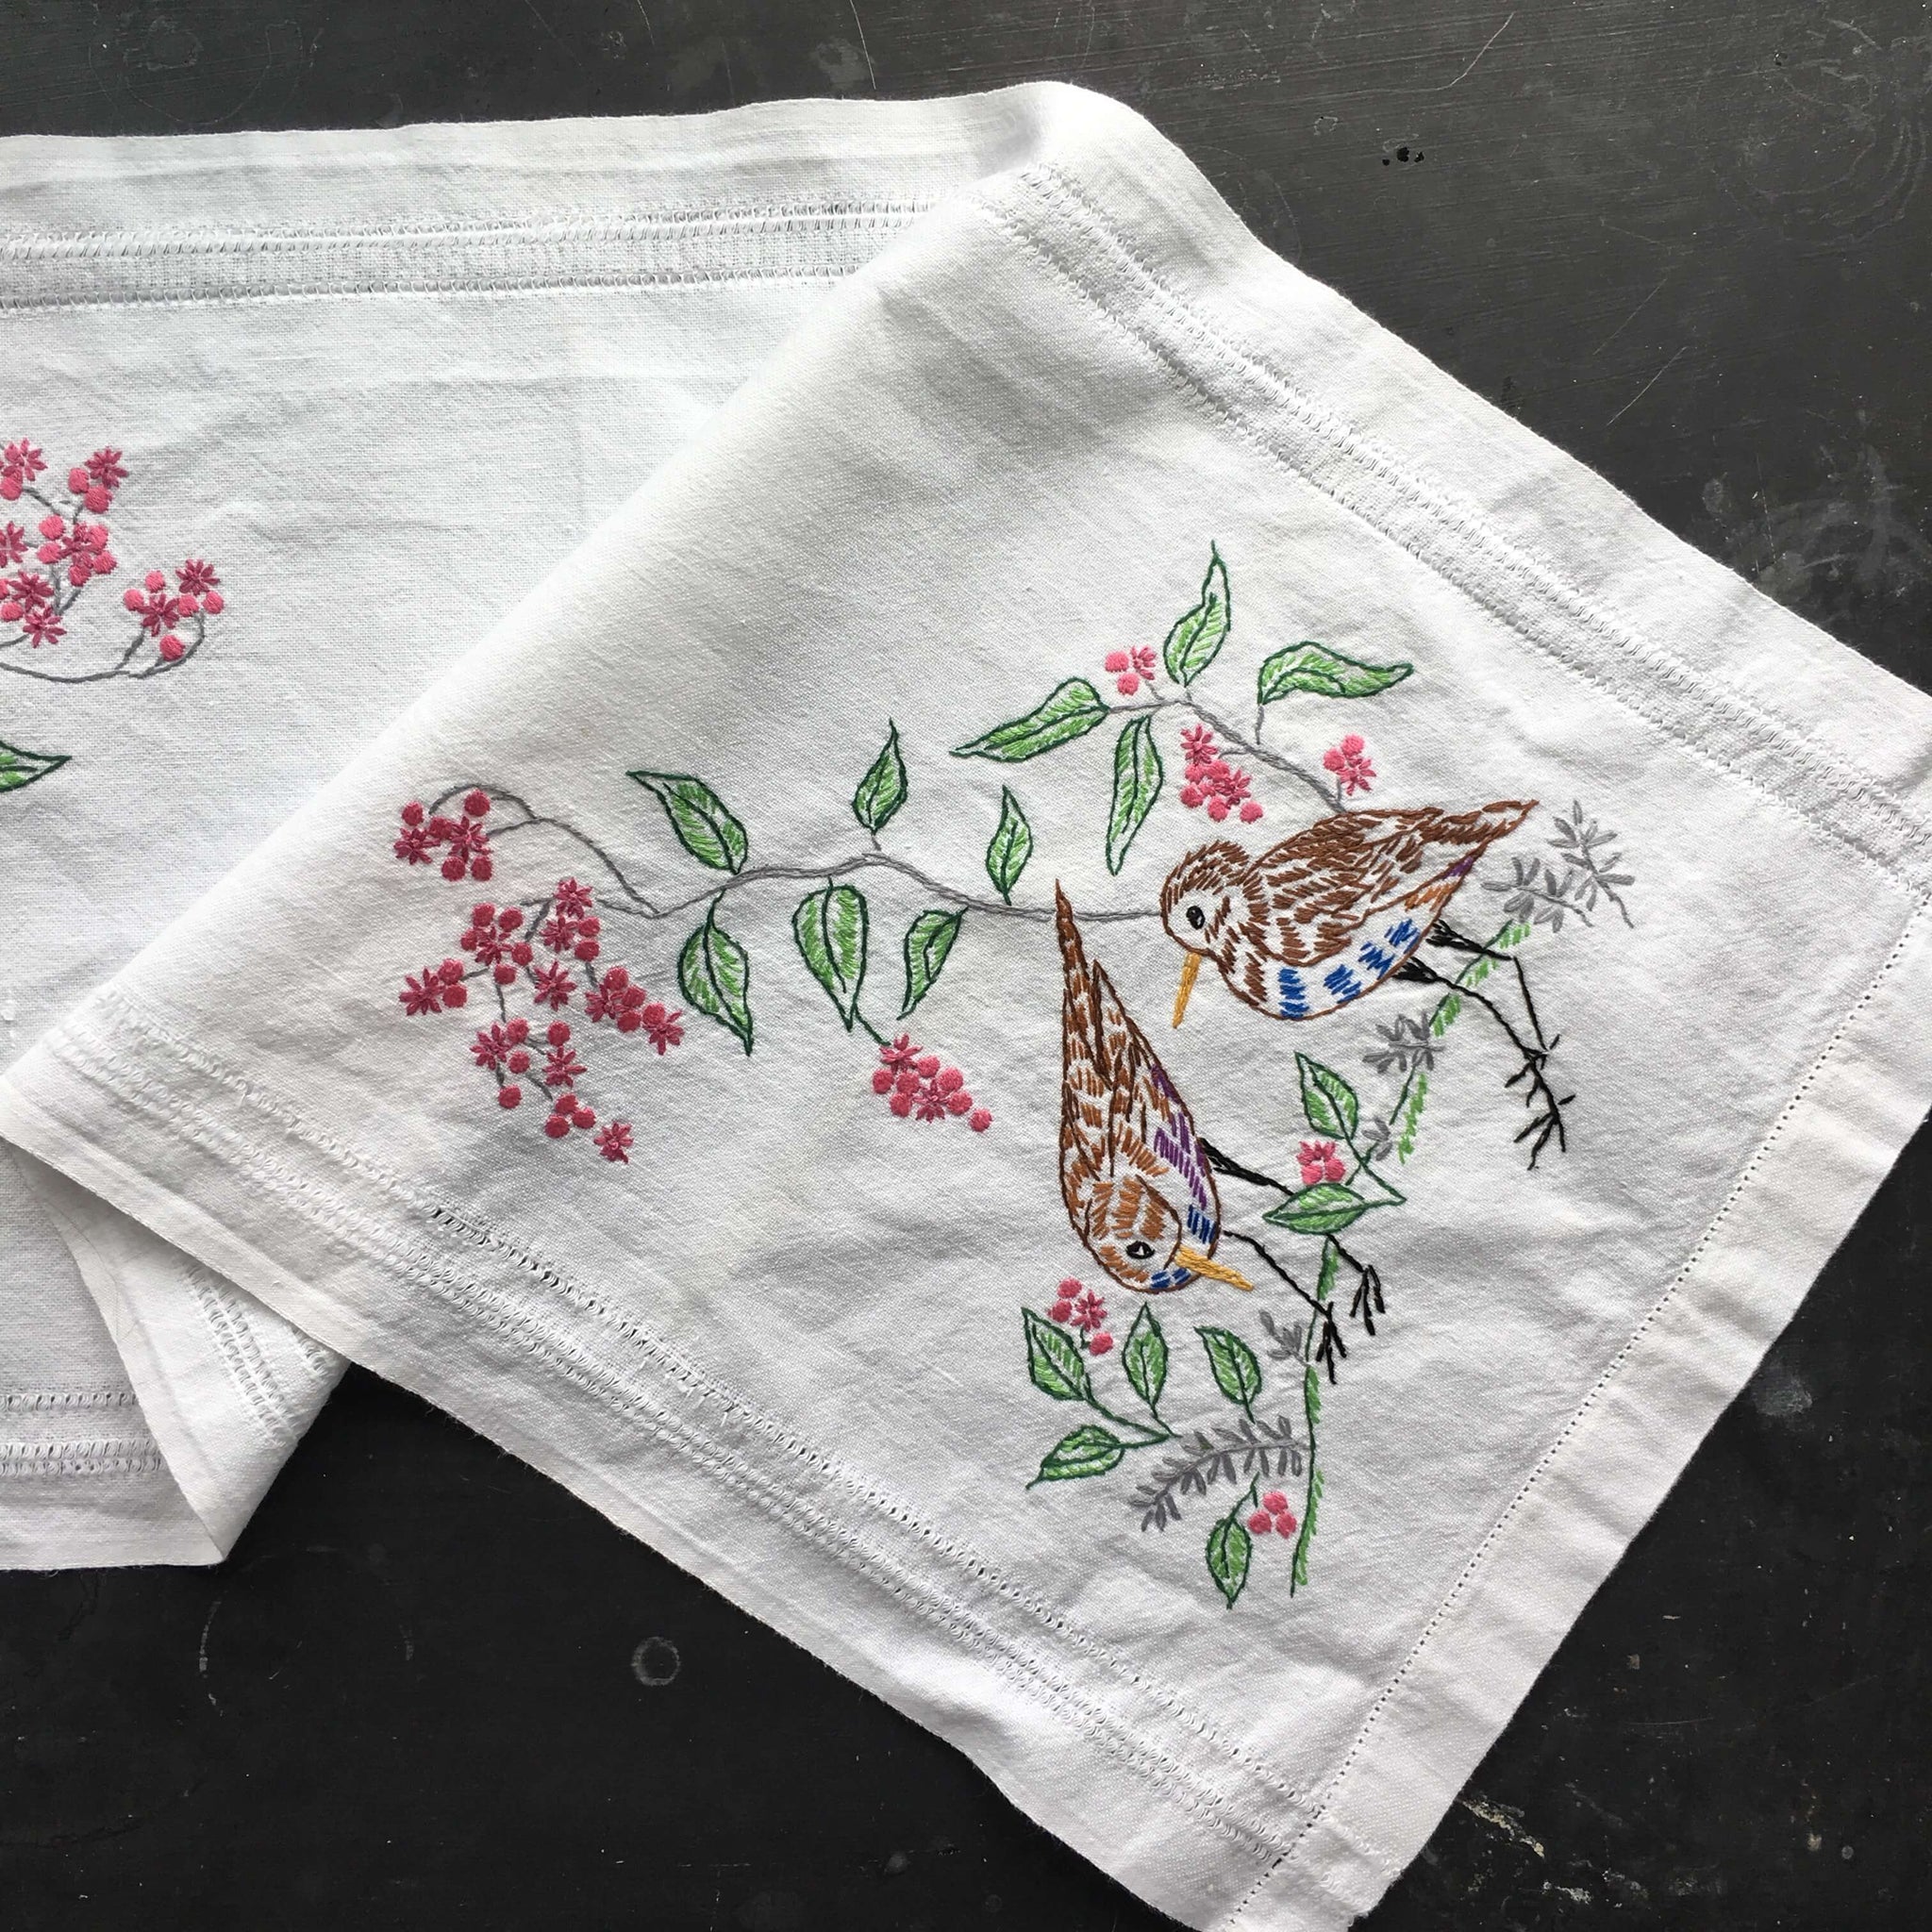 Vintage Embroidered Table Runner - Birds and Flowers - 14x37